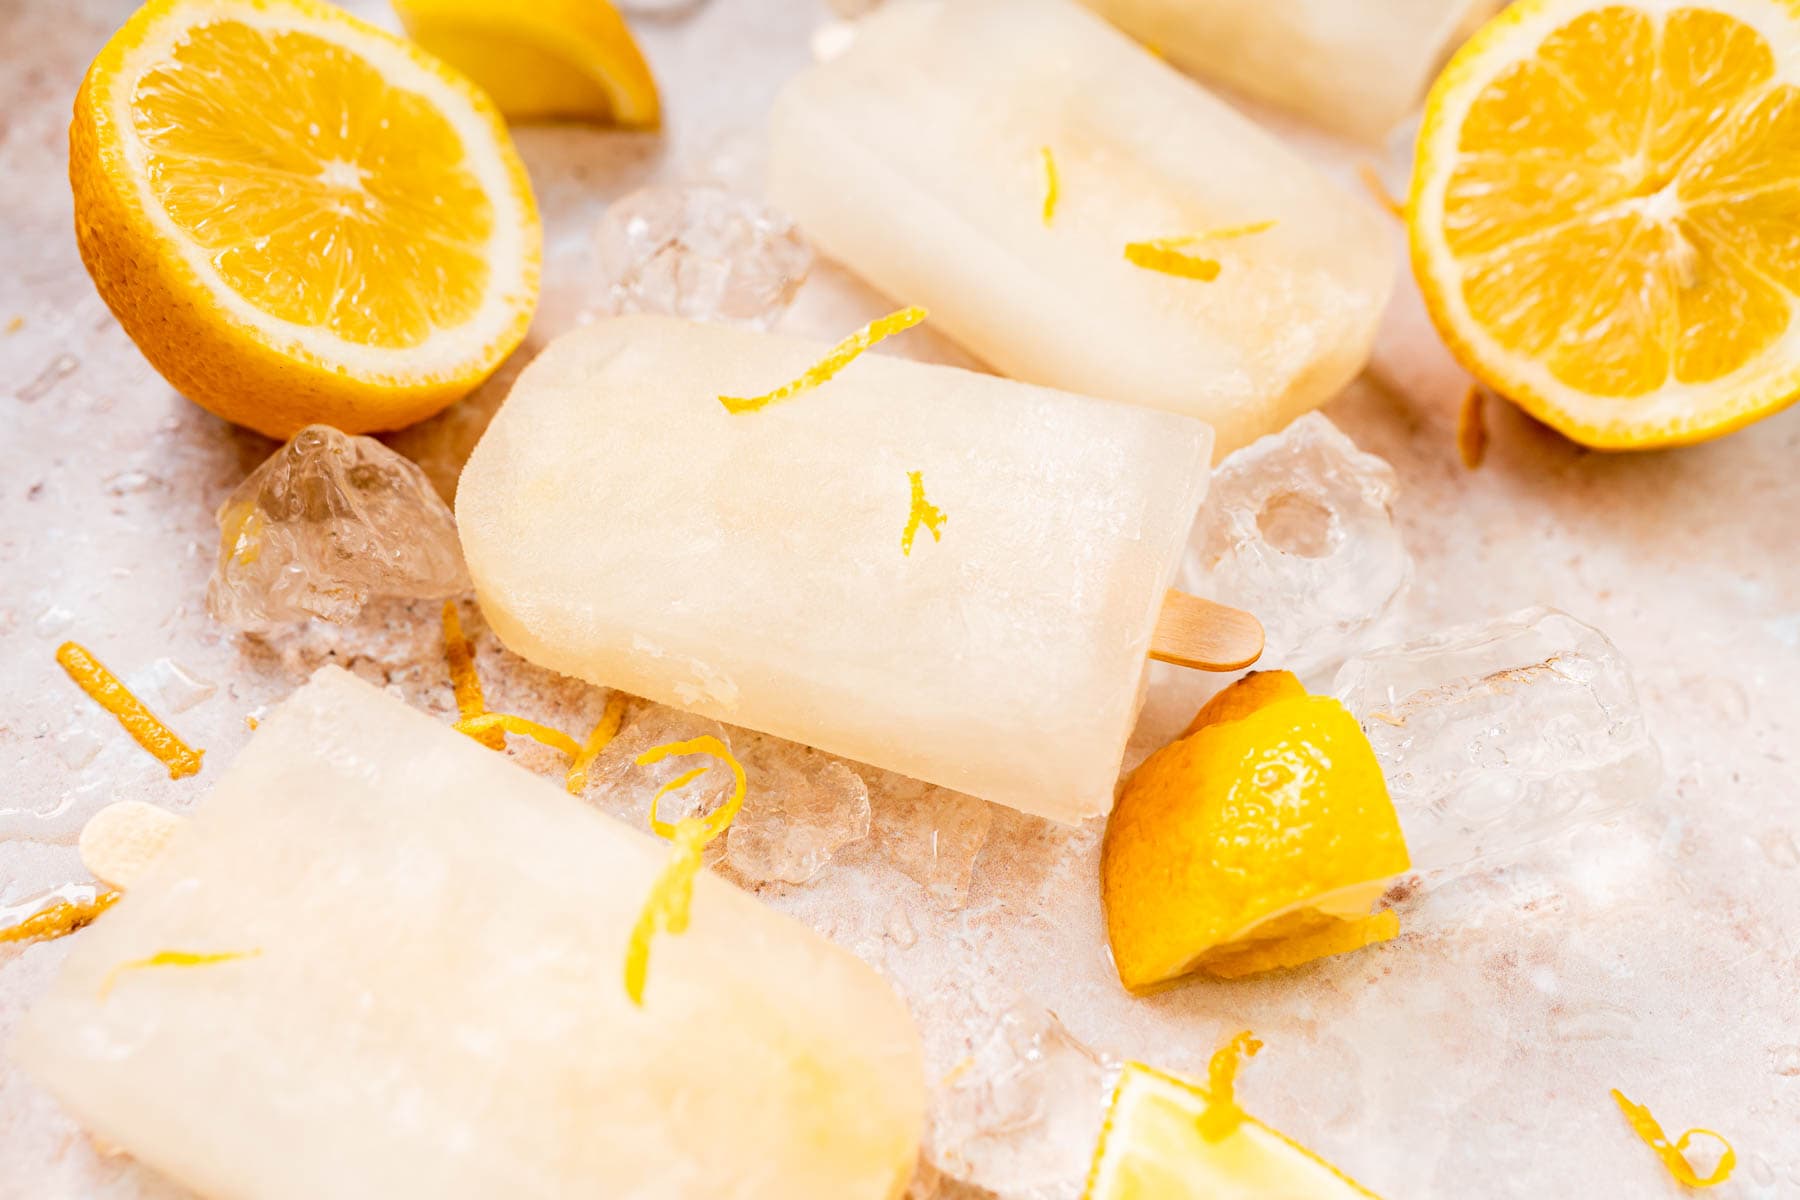 Homemade lemon popsicles resting on a tan table filled with ice and lemon slices.